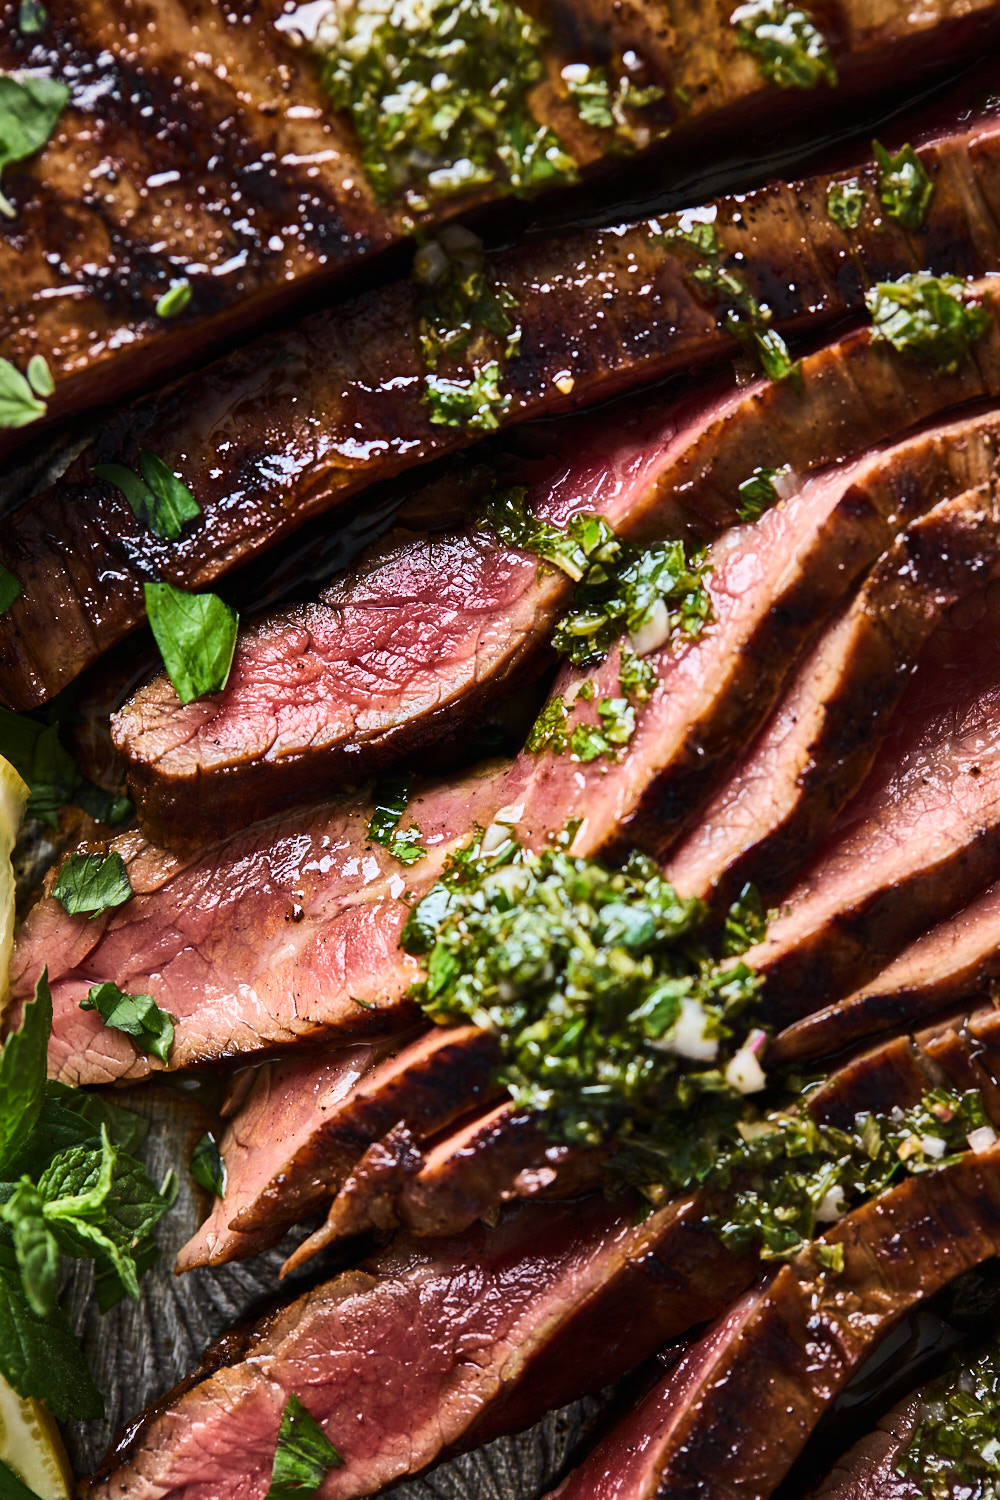 Grilled Flank Steak with chimichurri sauce